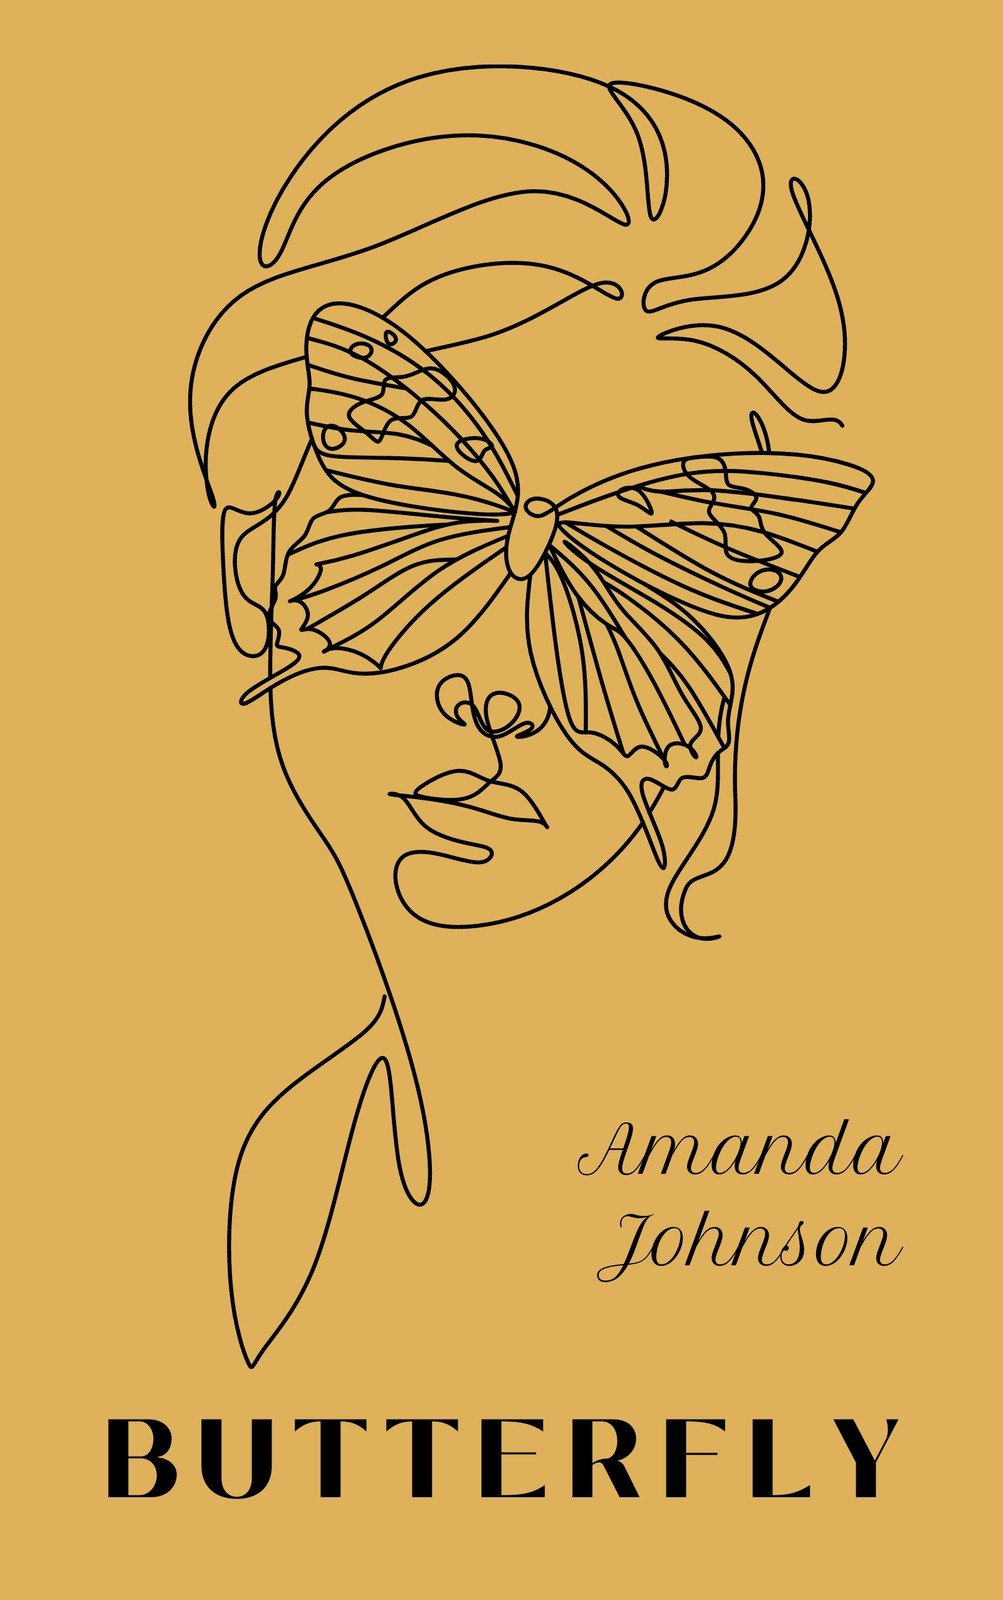 Gold Modern Minimalist Woman Butterfly Book Cover